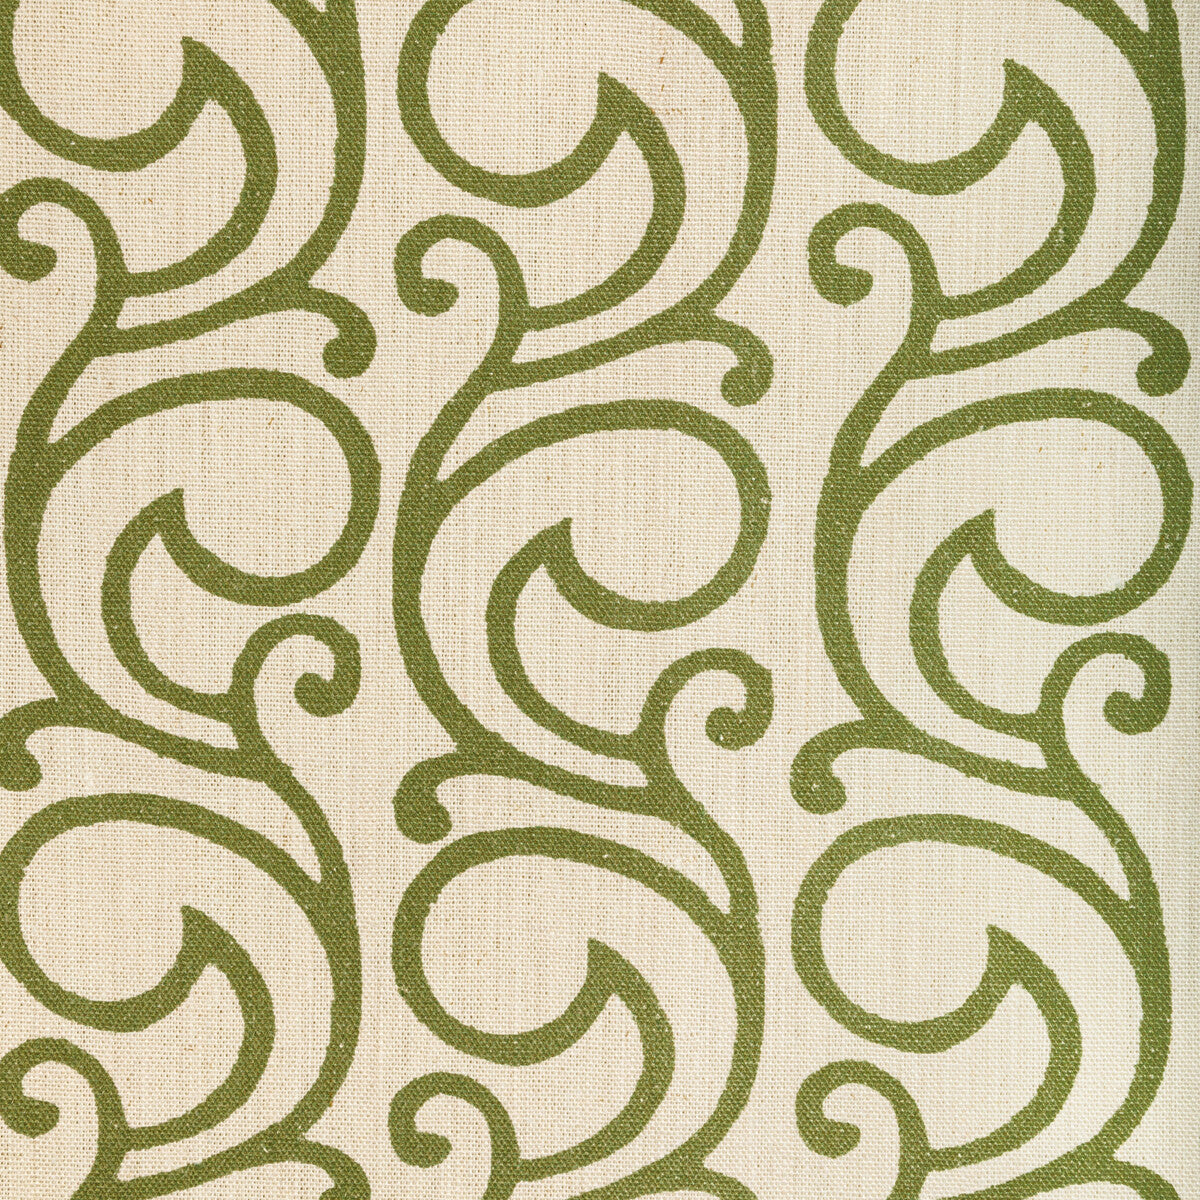 Serendipity Scroll fabric in ivy color - pattern 2022103.30.0 - by Lee Jofa in the Sarah Bartholomew collection